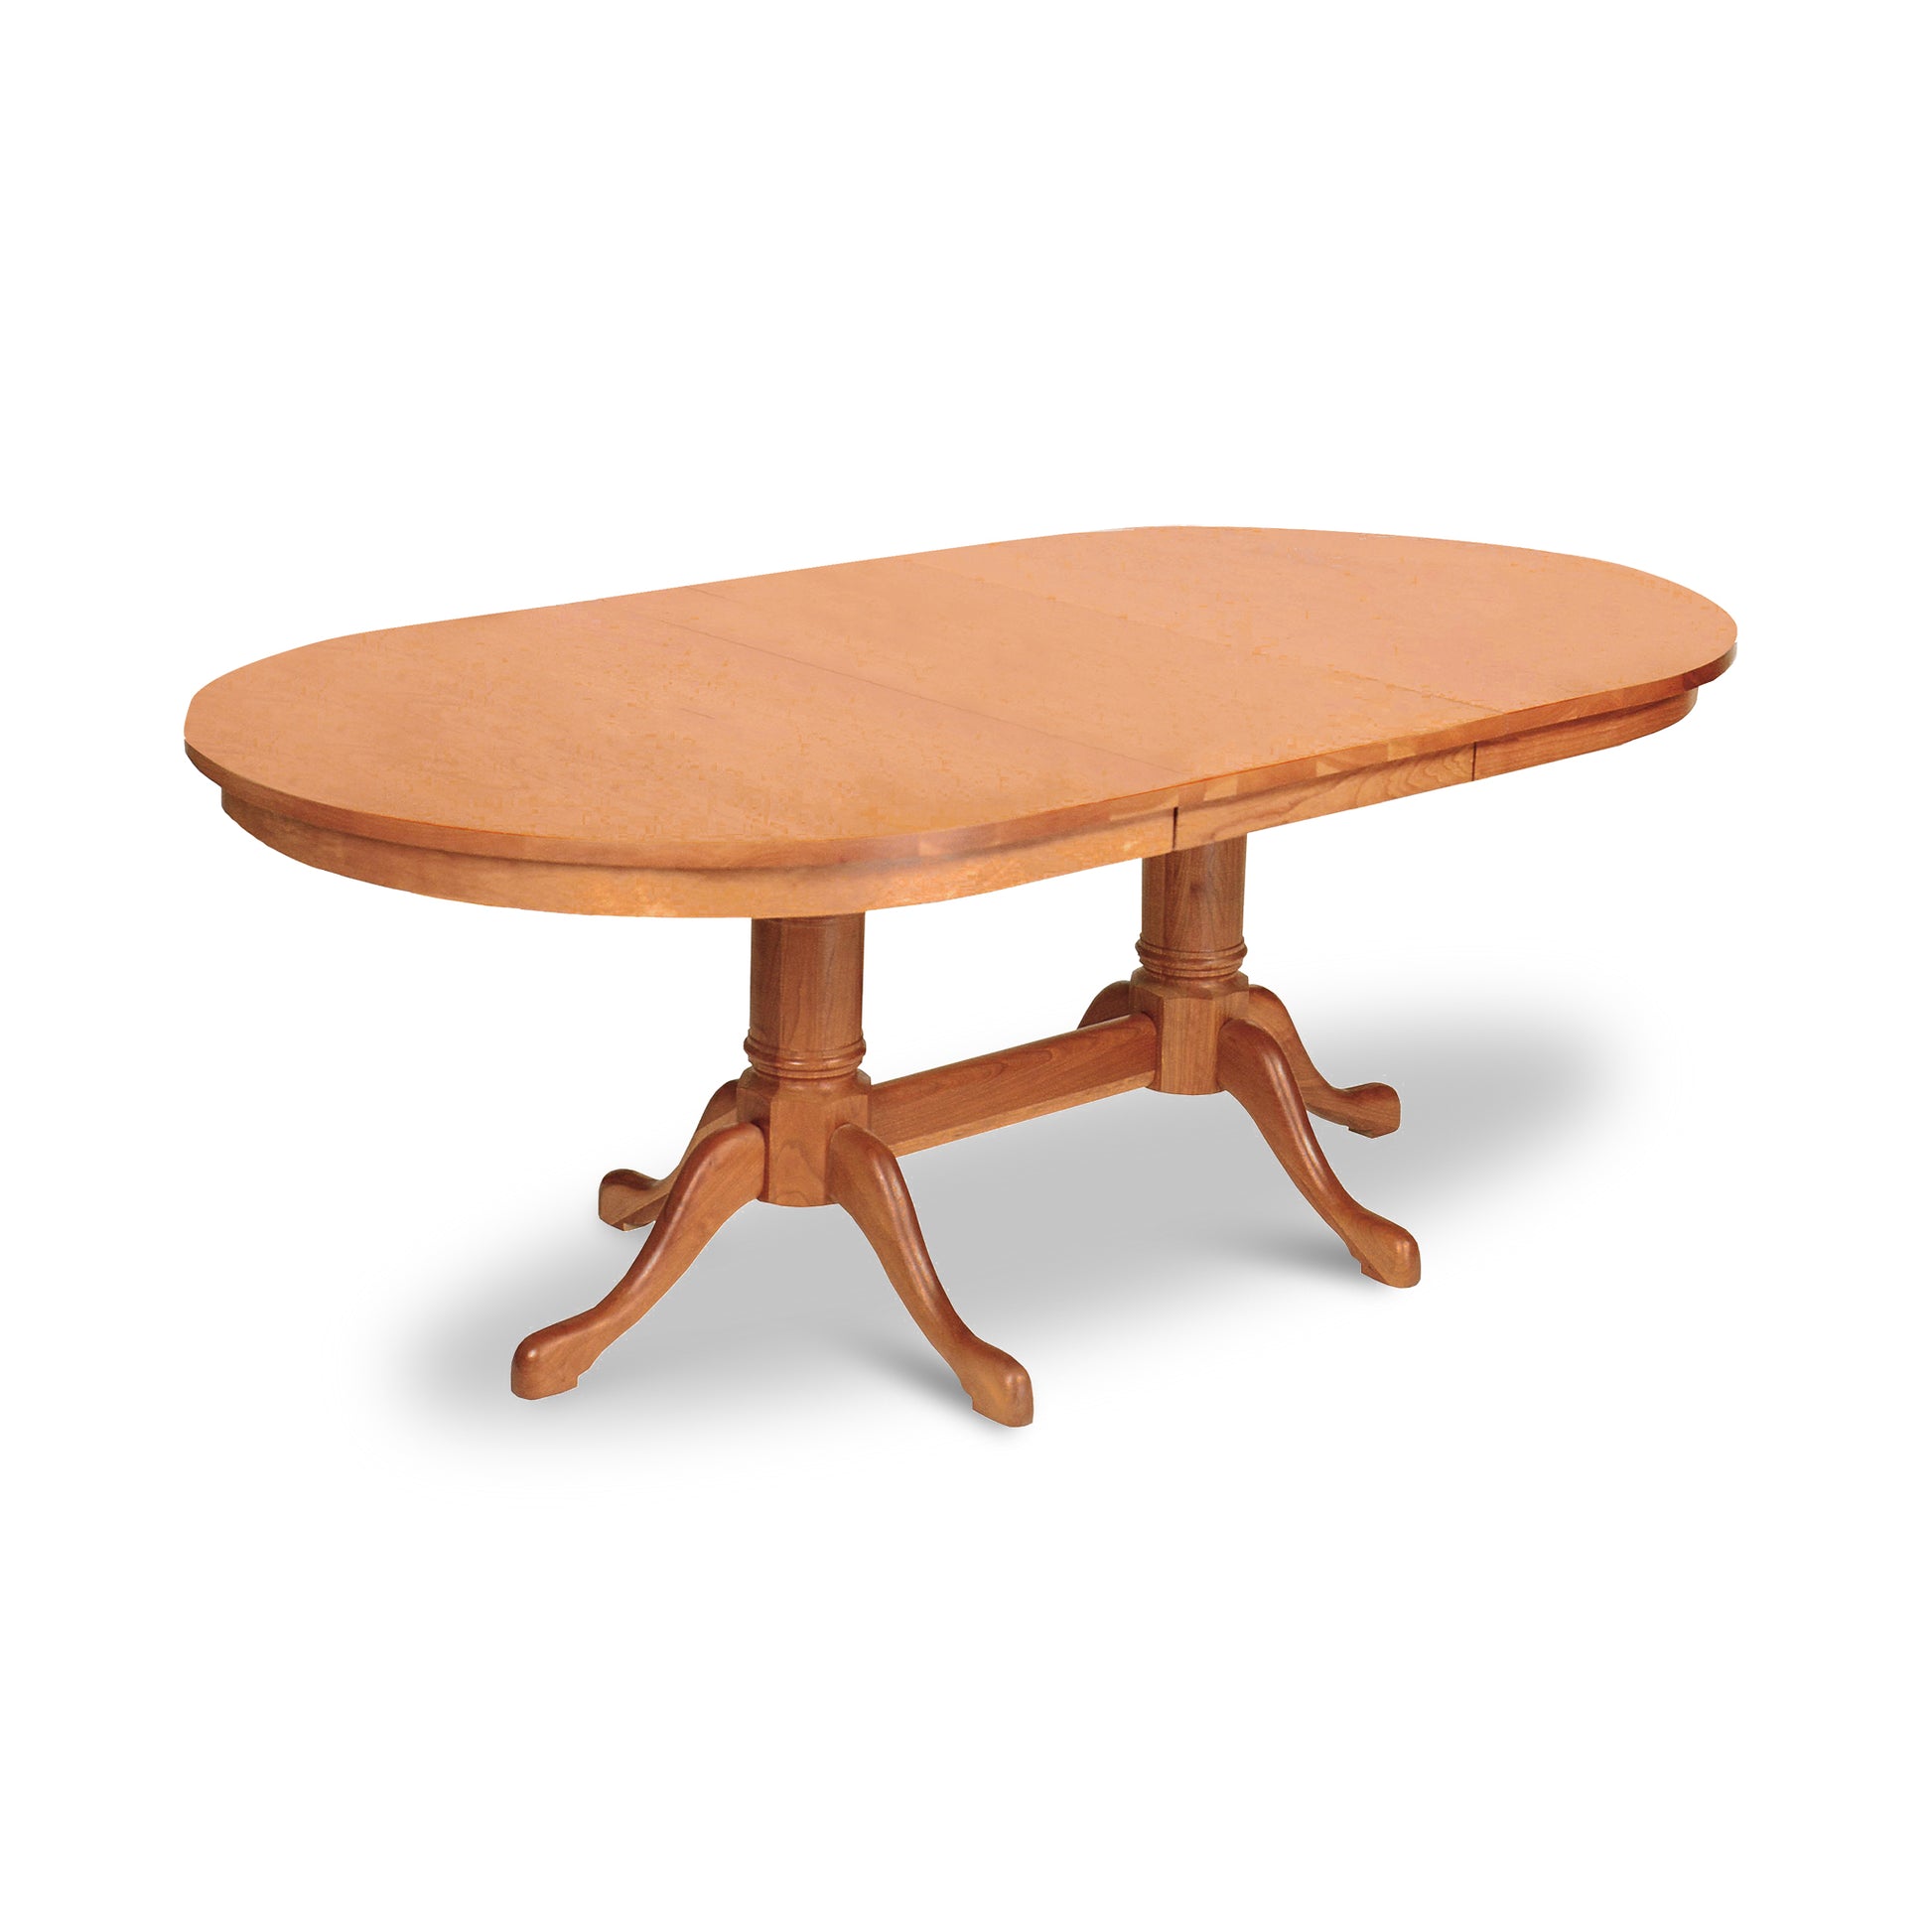 A Cabriole Double Pedestal Extension Dining Table by Lyndon Furniture with solid wood construction.